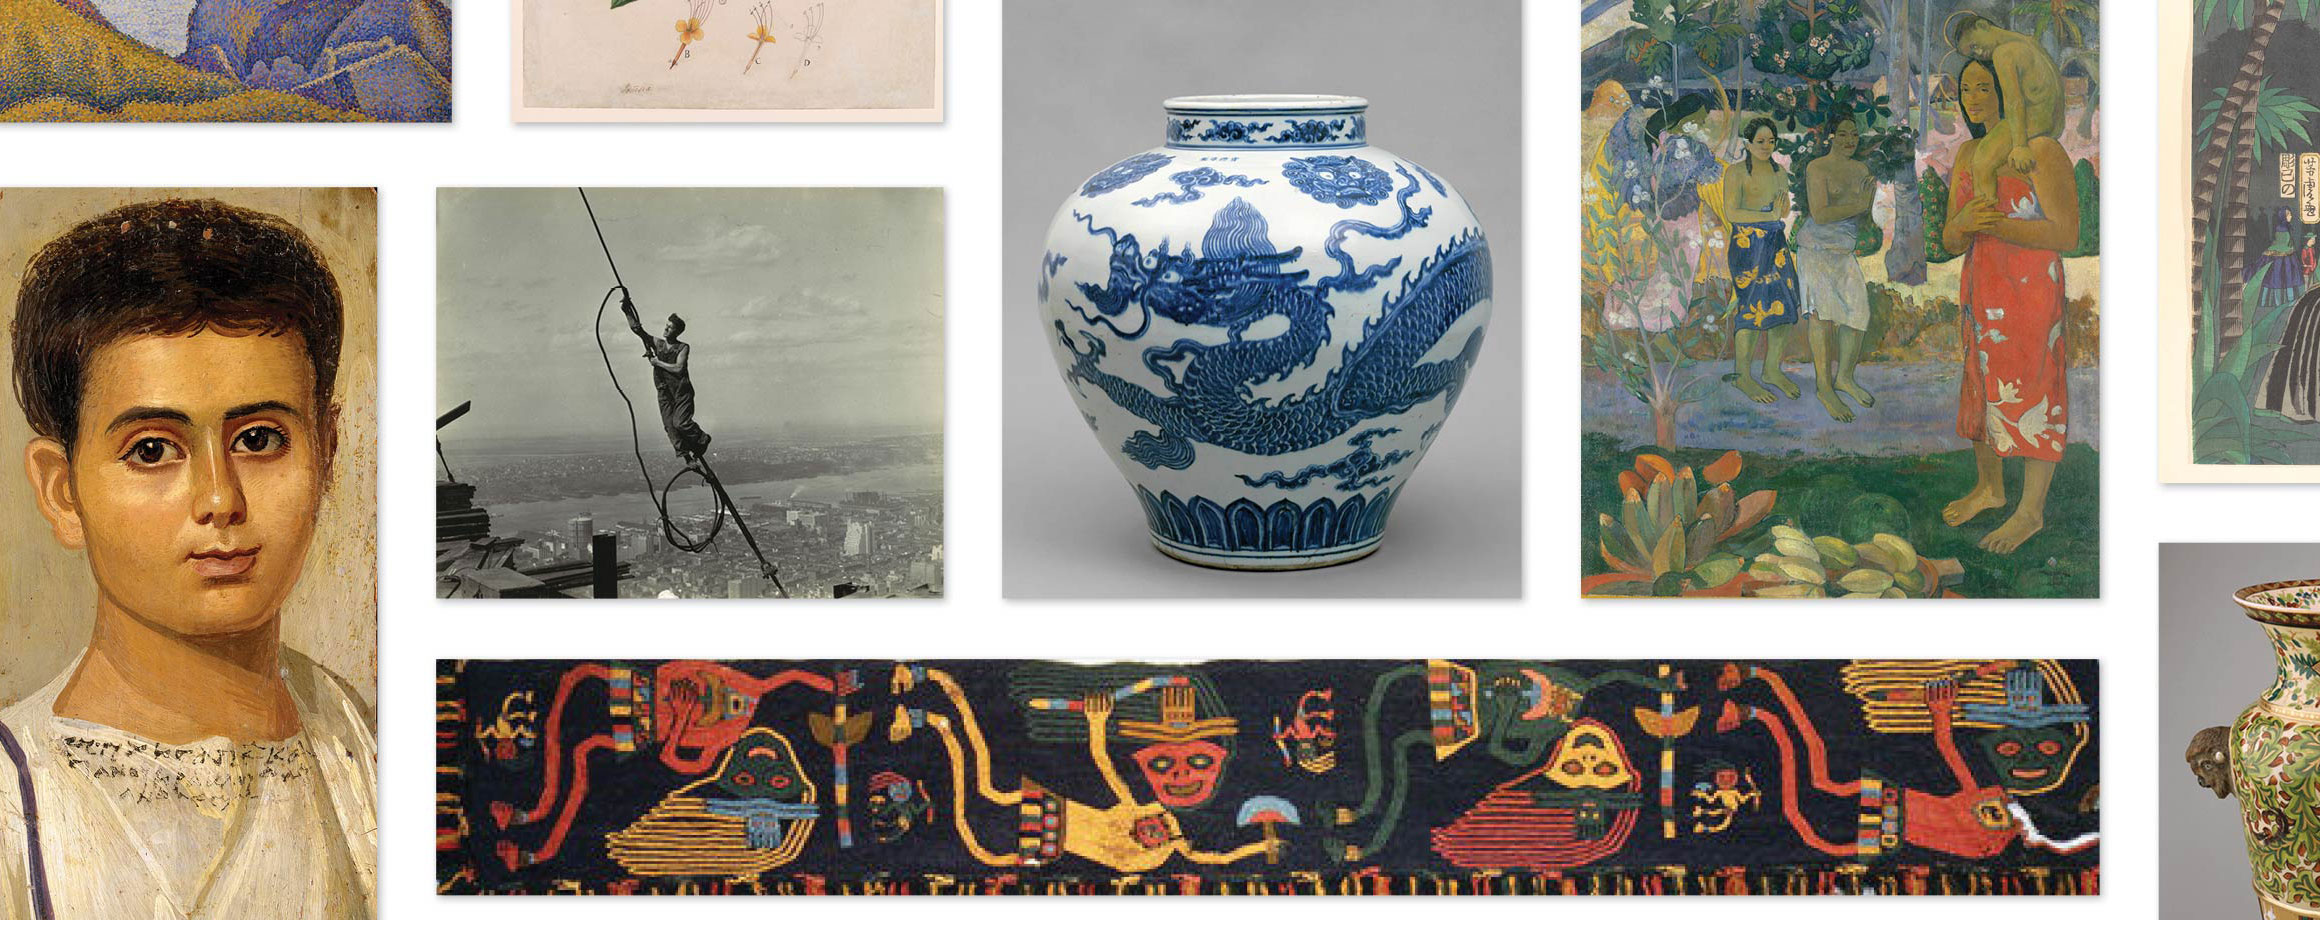 Collage of public-domain images in The Met collection